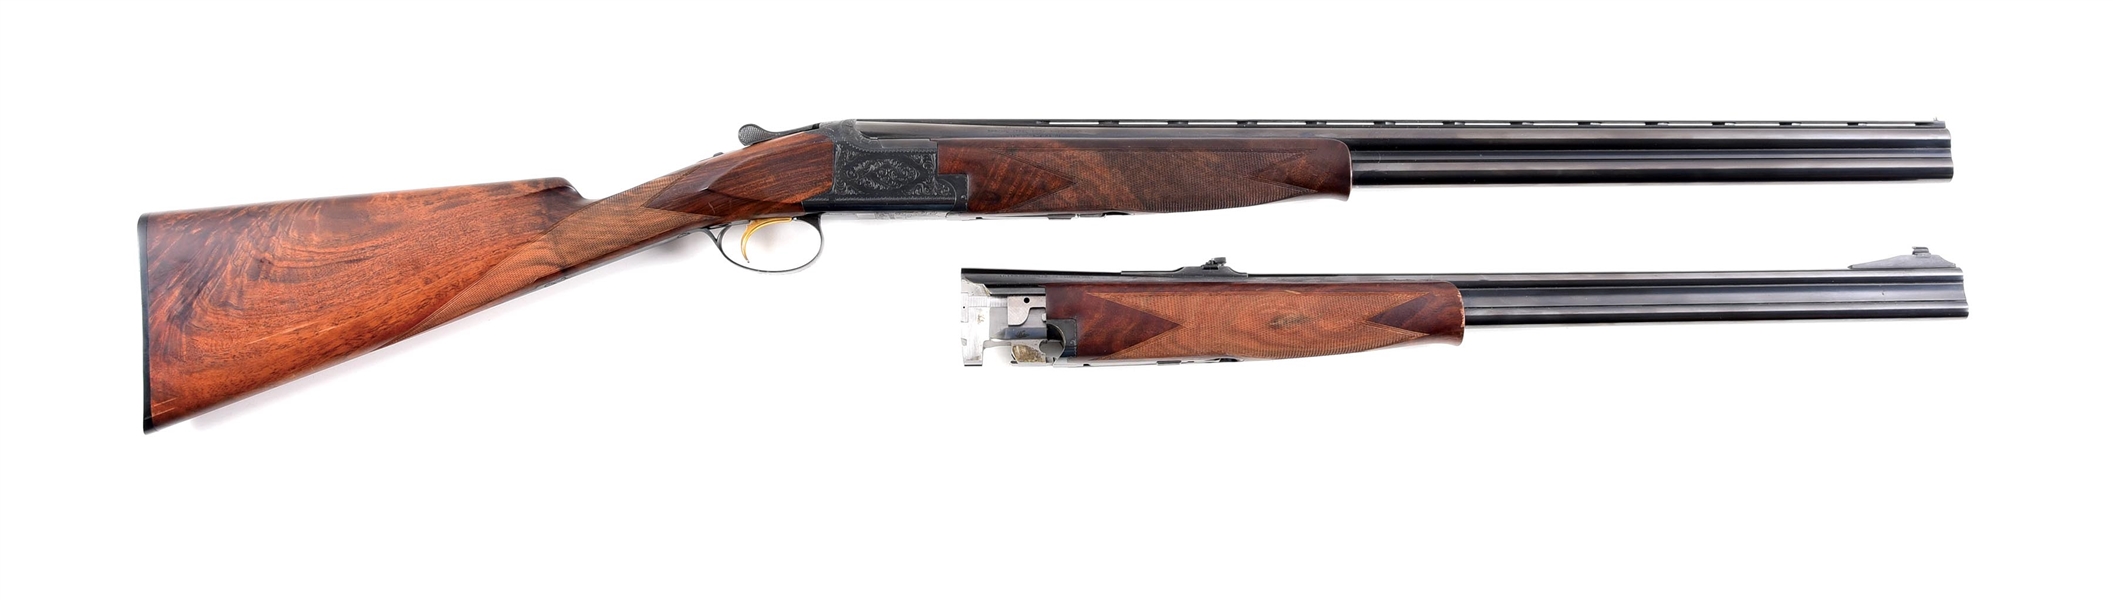 (M) BROWNING SUPERPOSED CONTINENTAL EXPRESS WITH RIFLE AND SHOTGUN BARREL SETS.